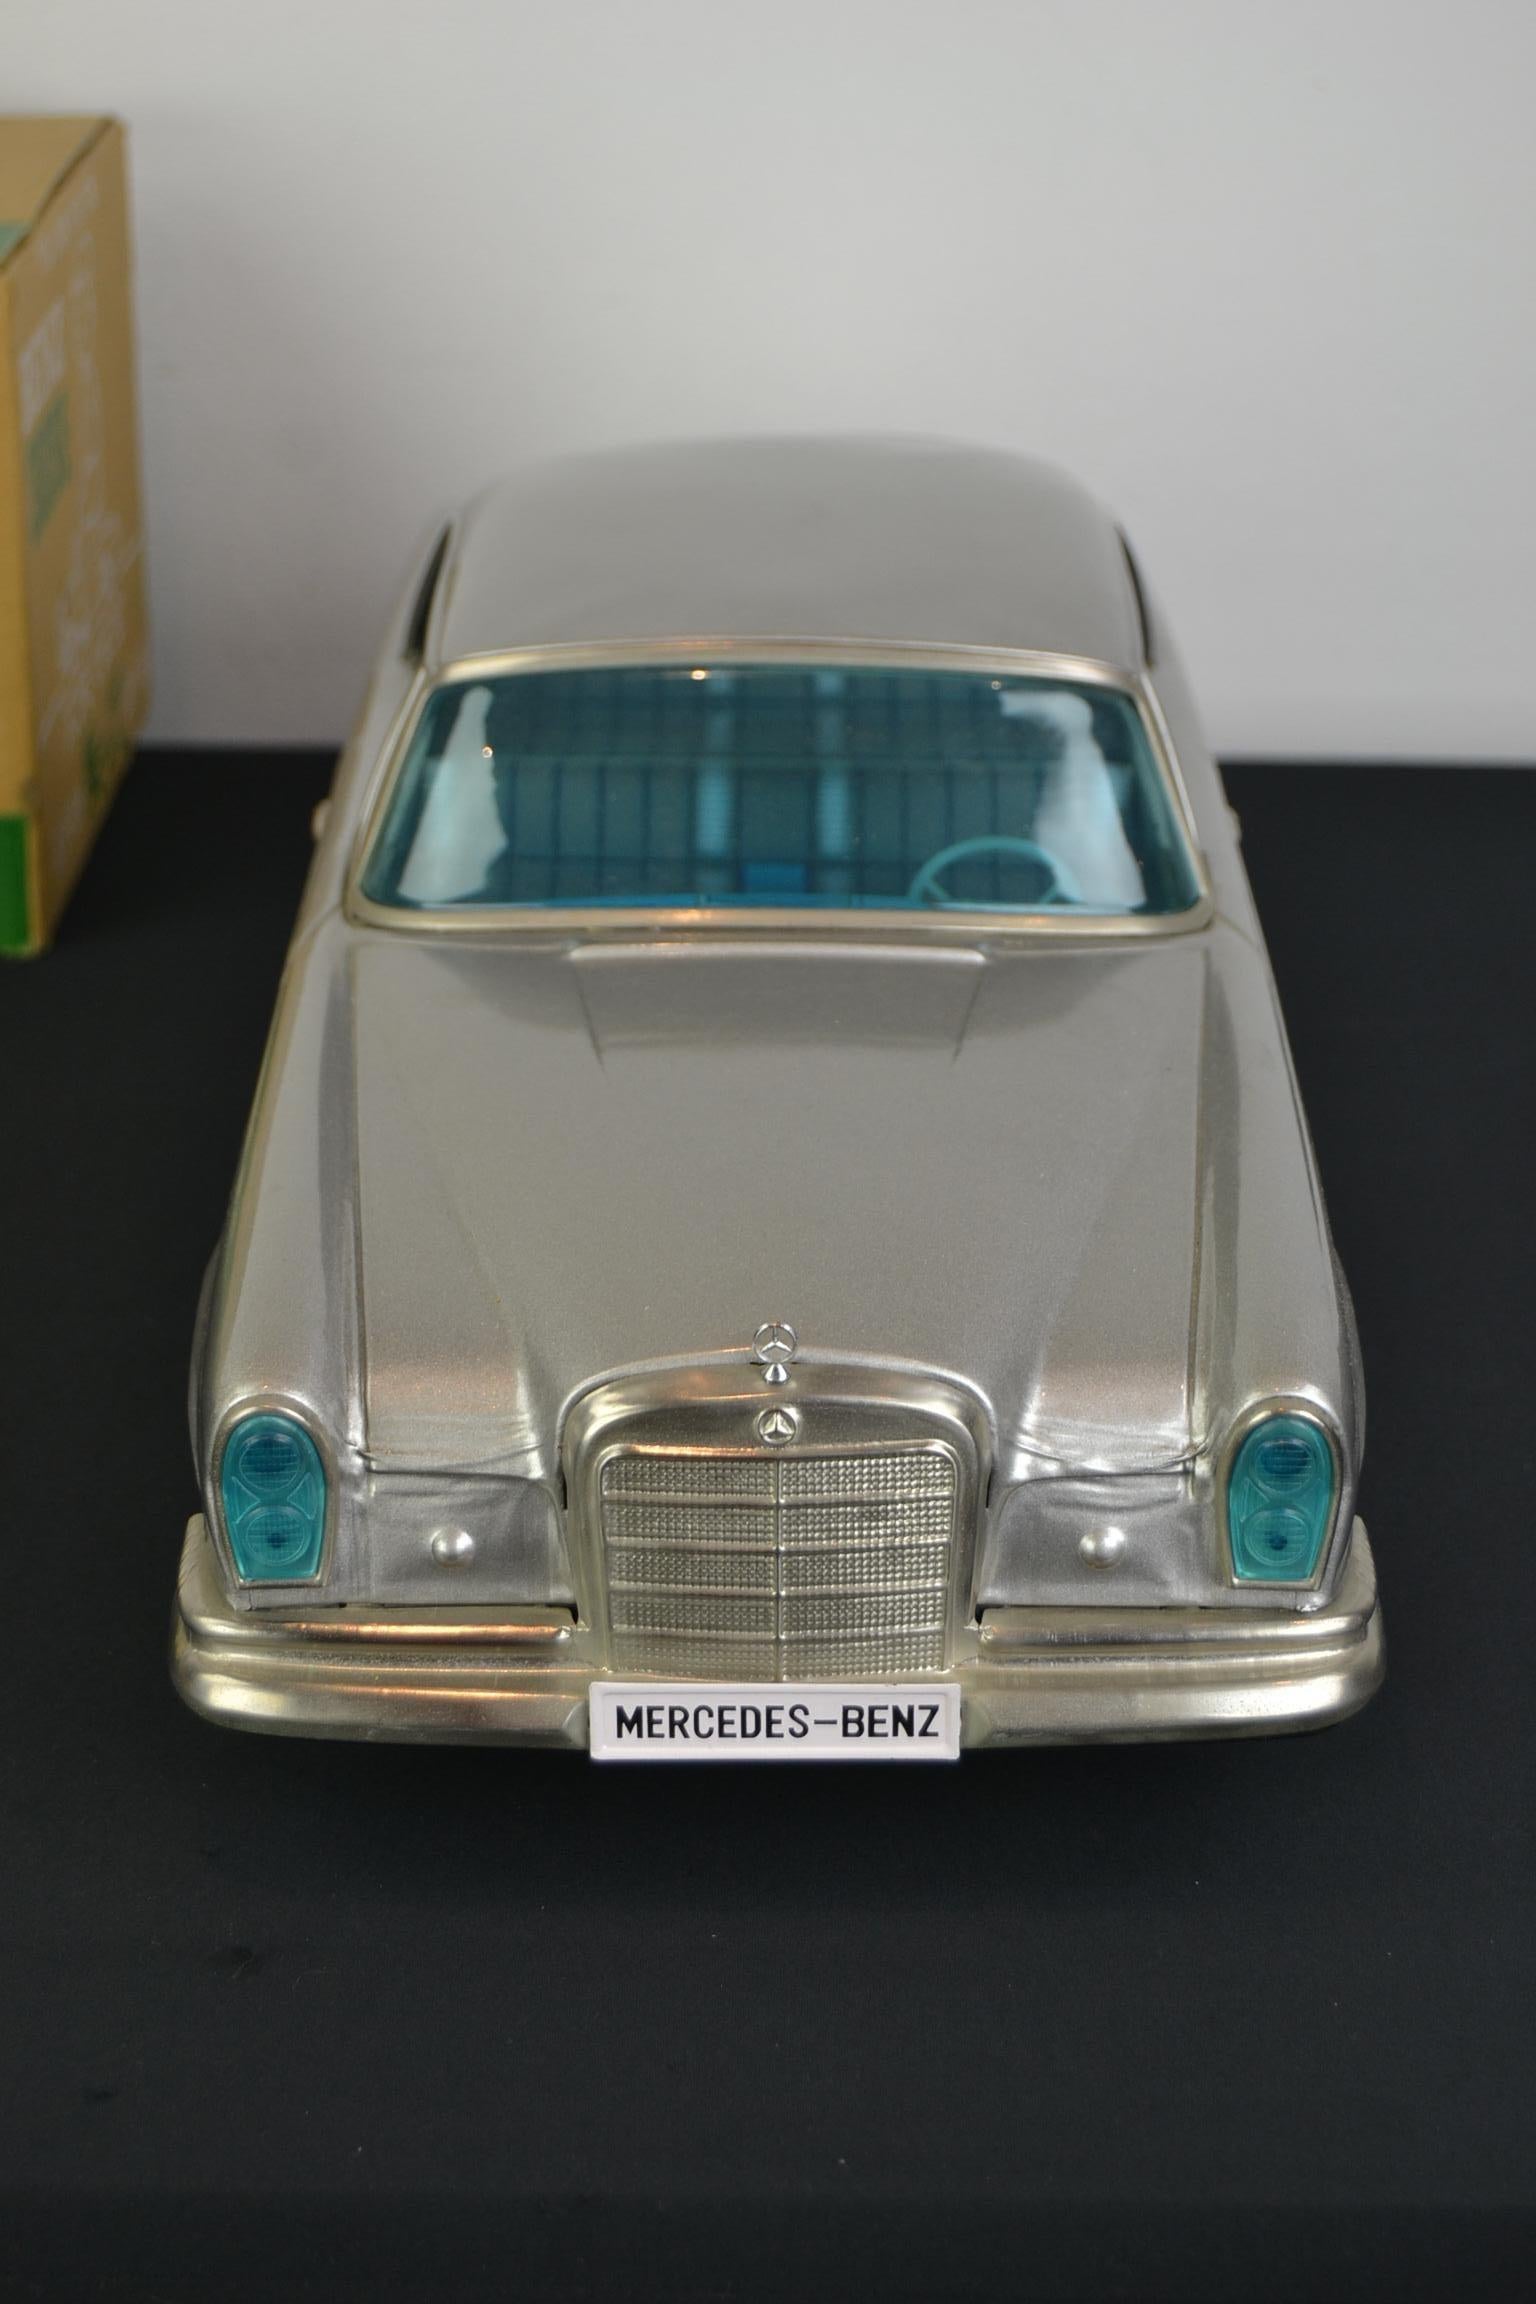 Boxed Mercedes Benz 300 SE Toy Model by Ichiko Japan, 1980s 4